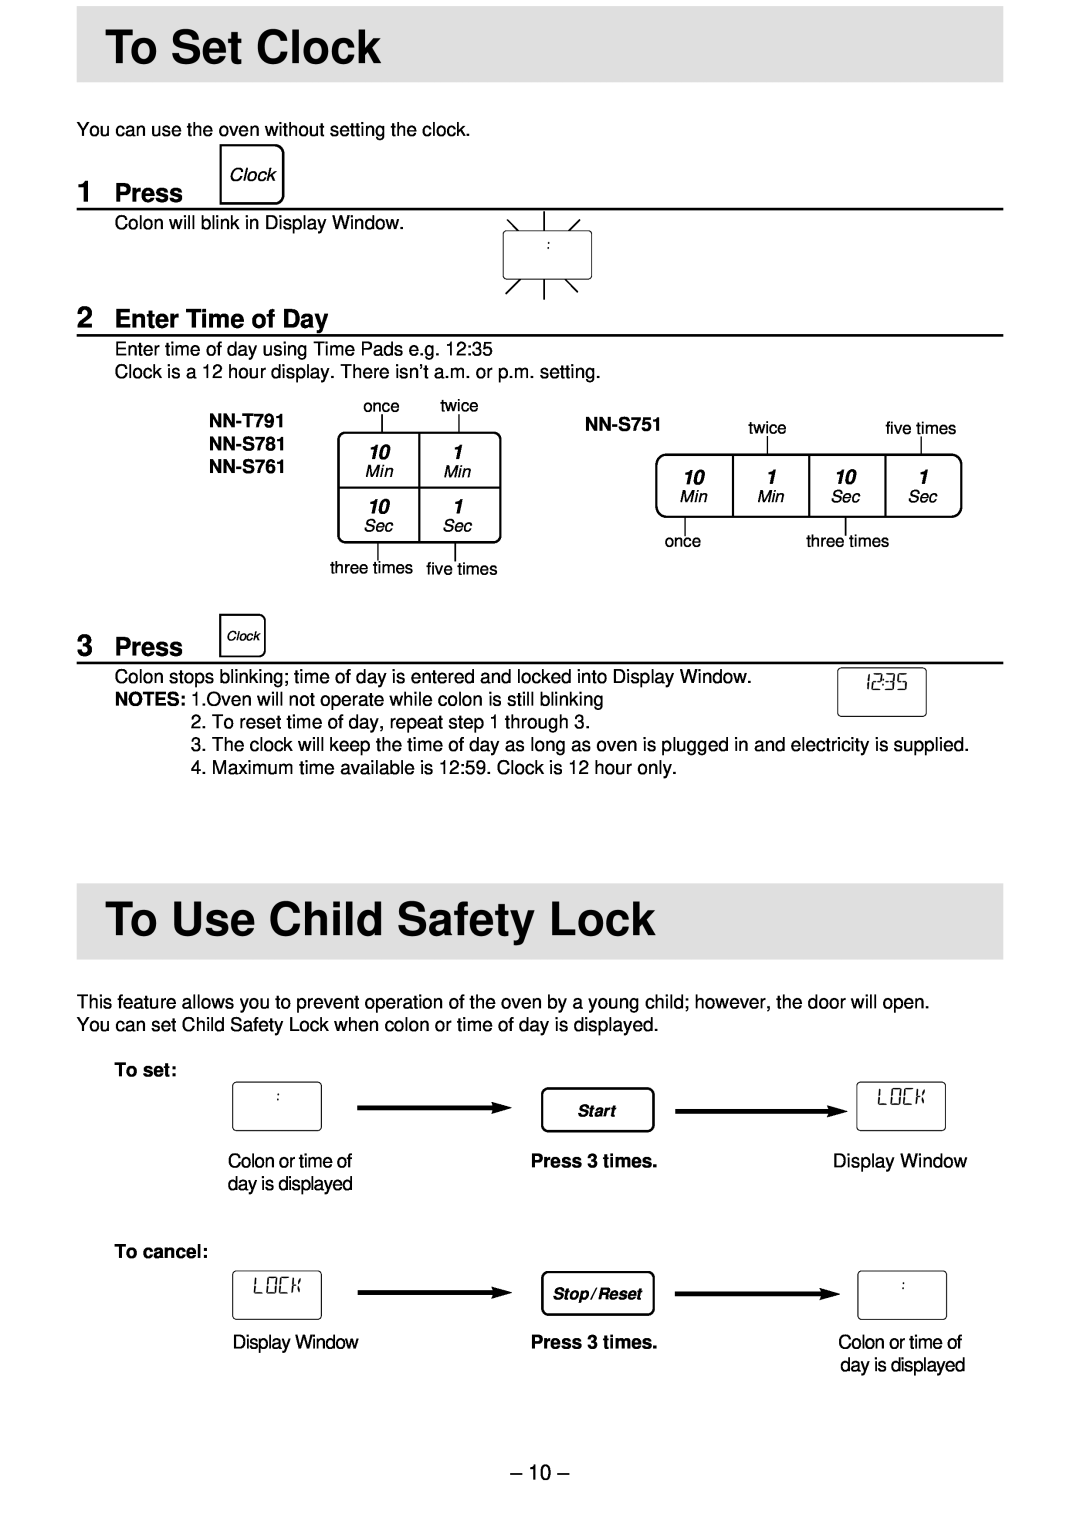 Panasonic NN-T791, NN-S761, NN-S781 manual To Set Clock, To Use Child Safety Lock, Press, Enter Time of Day 